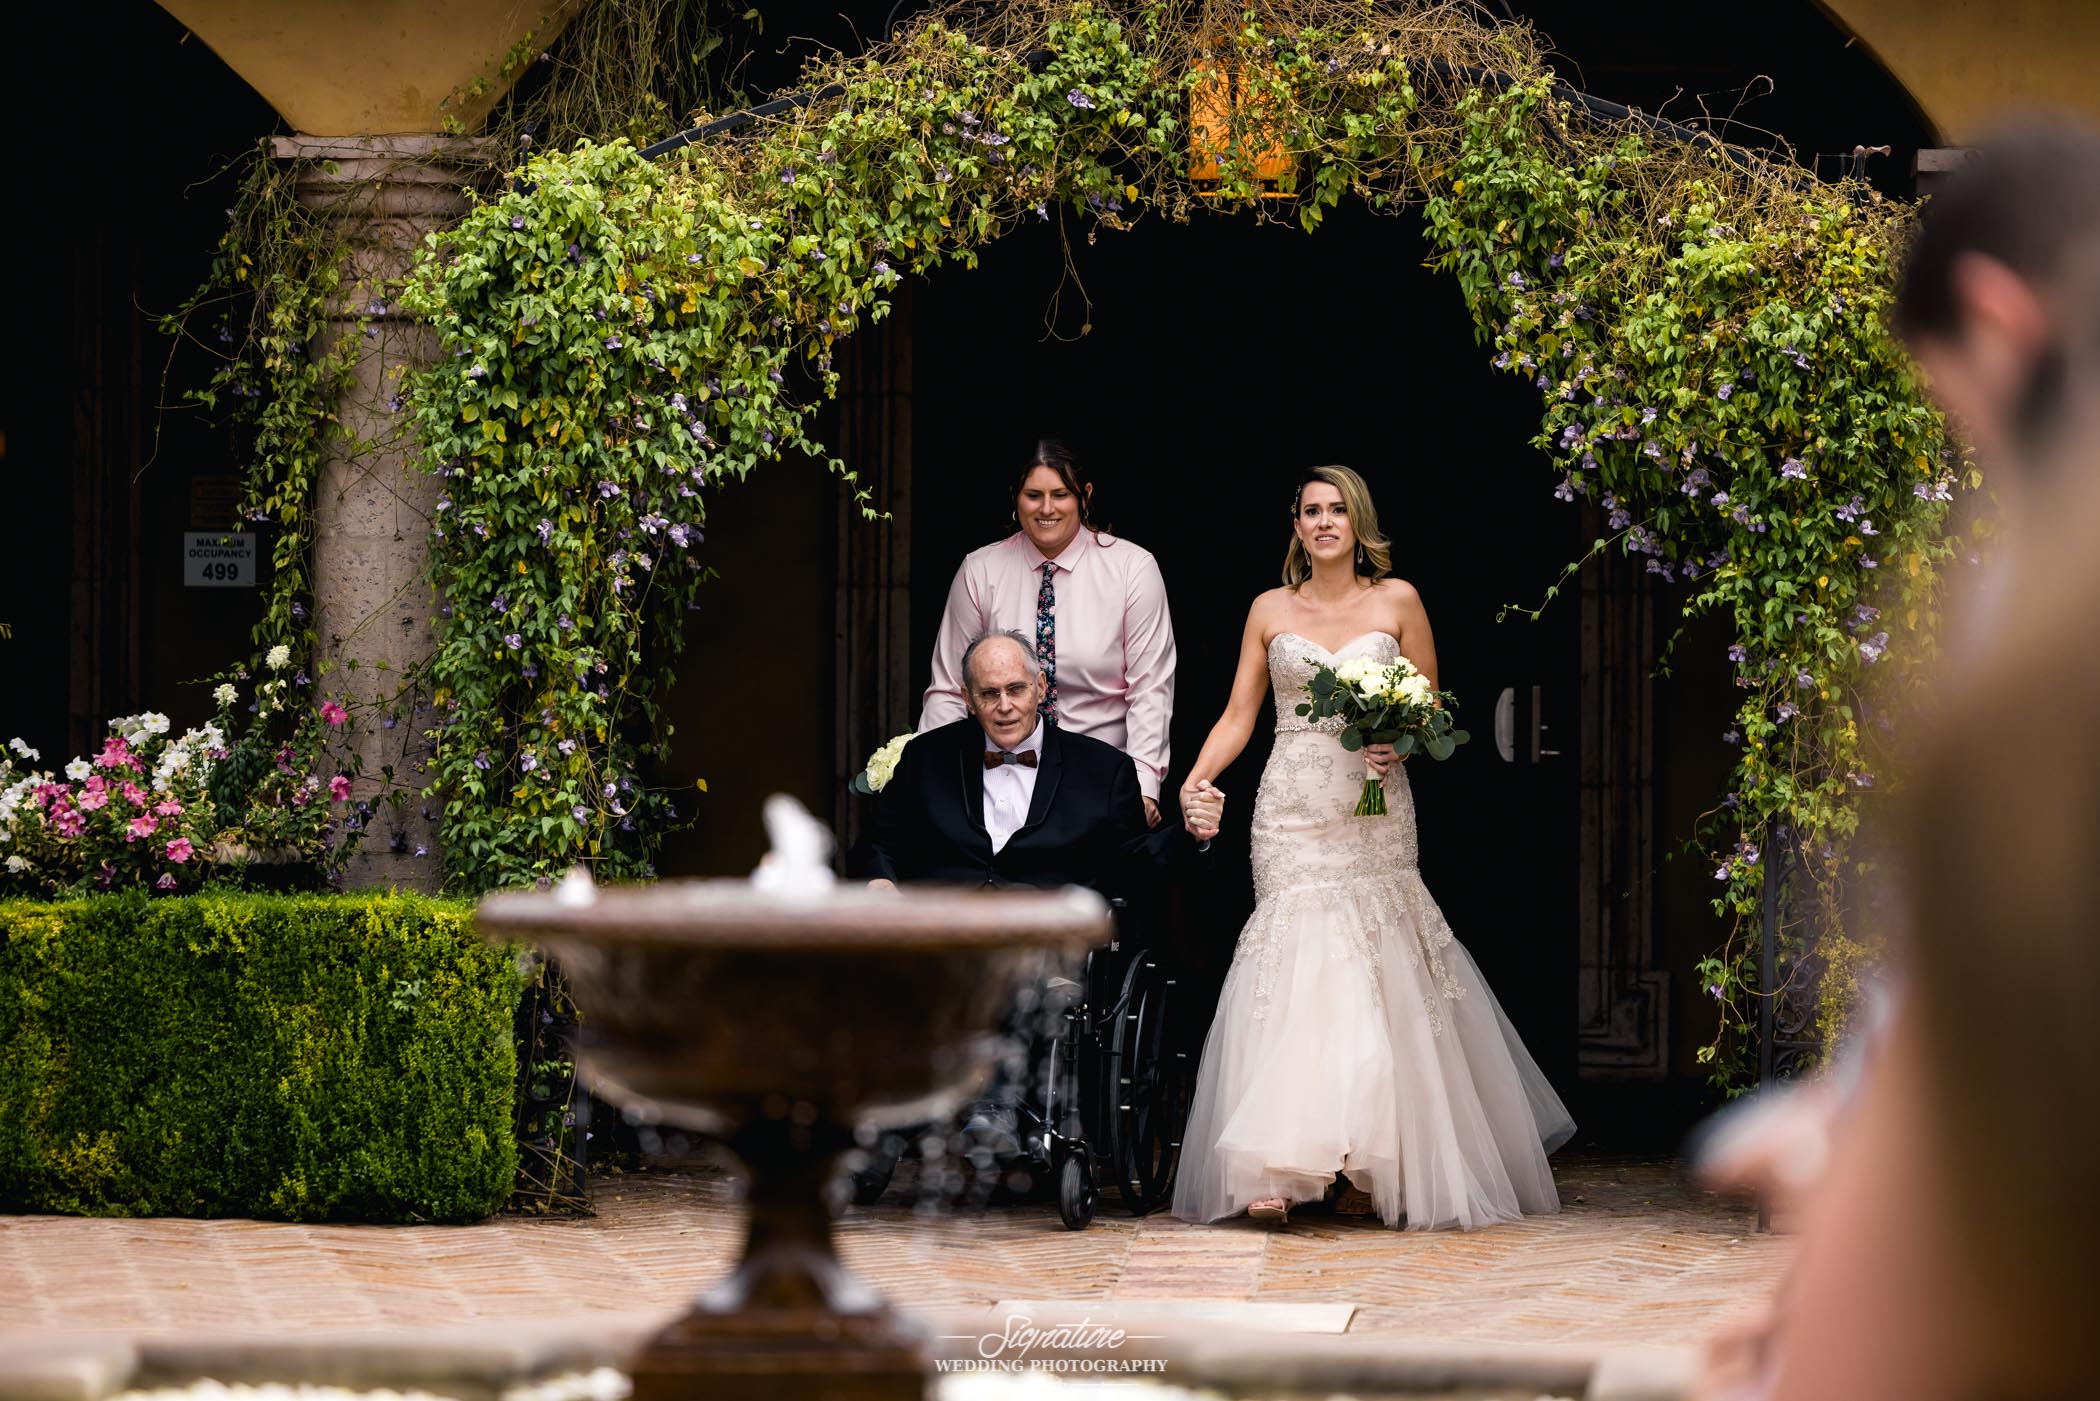 Bride walking down aisle with patriarch in wheelchair